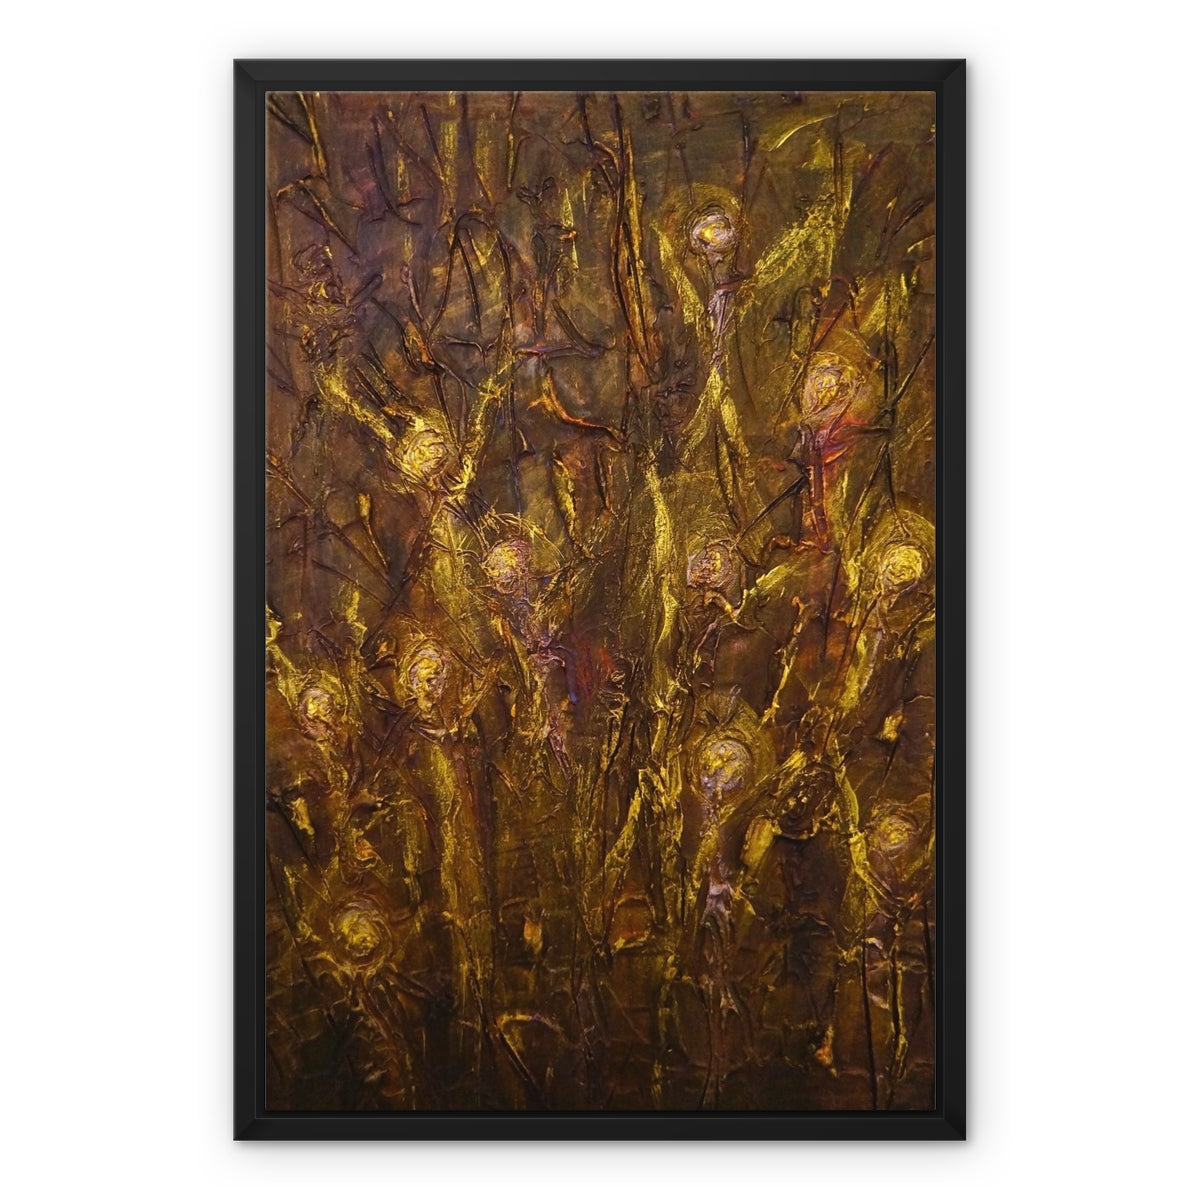 Tam O Shanter Witches Painting | Framed Canvas From Scotland-Floating Framed Canvas Prints-Abstract & Impressionistic Art Gallery-18"x24"-Paintings, Prints, Homeware, Art Gifts From Scotland By Scottish Artist Kevin Hunter